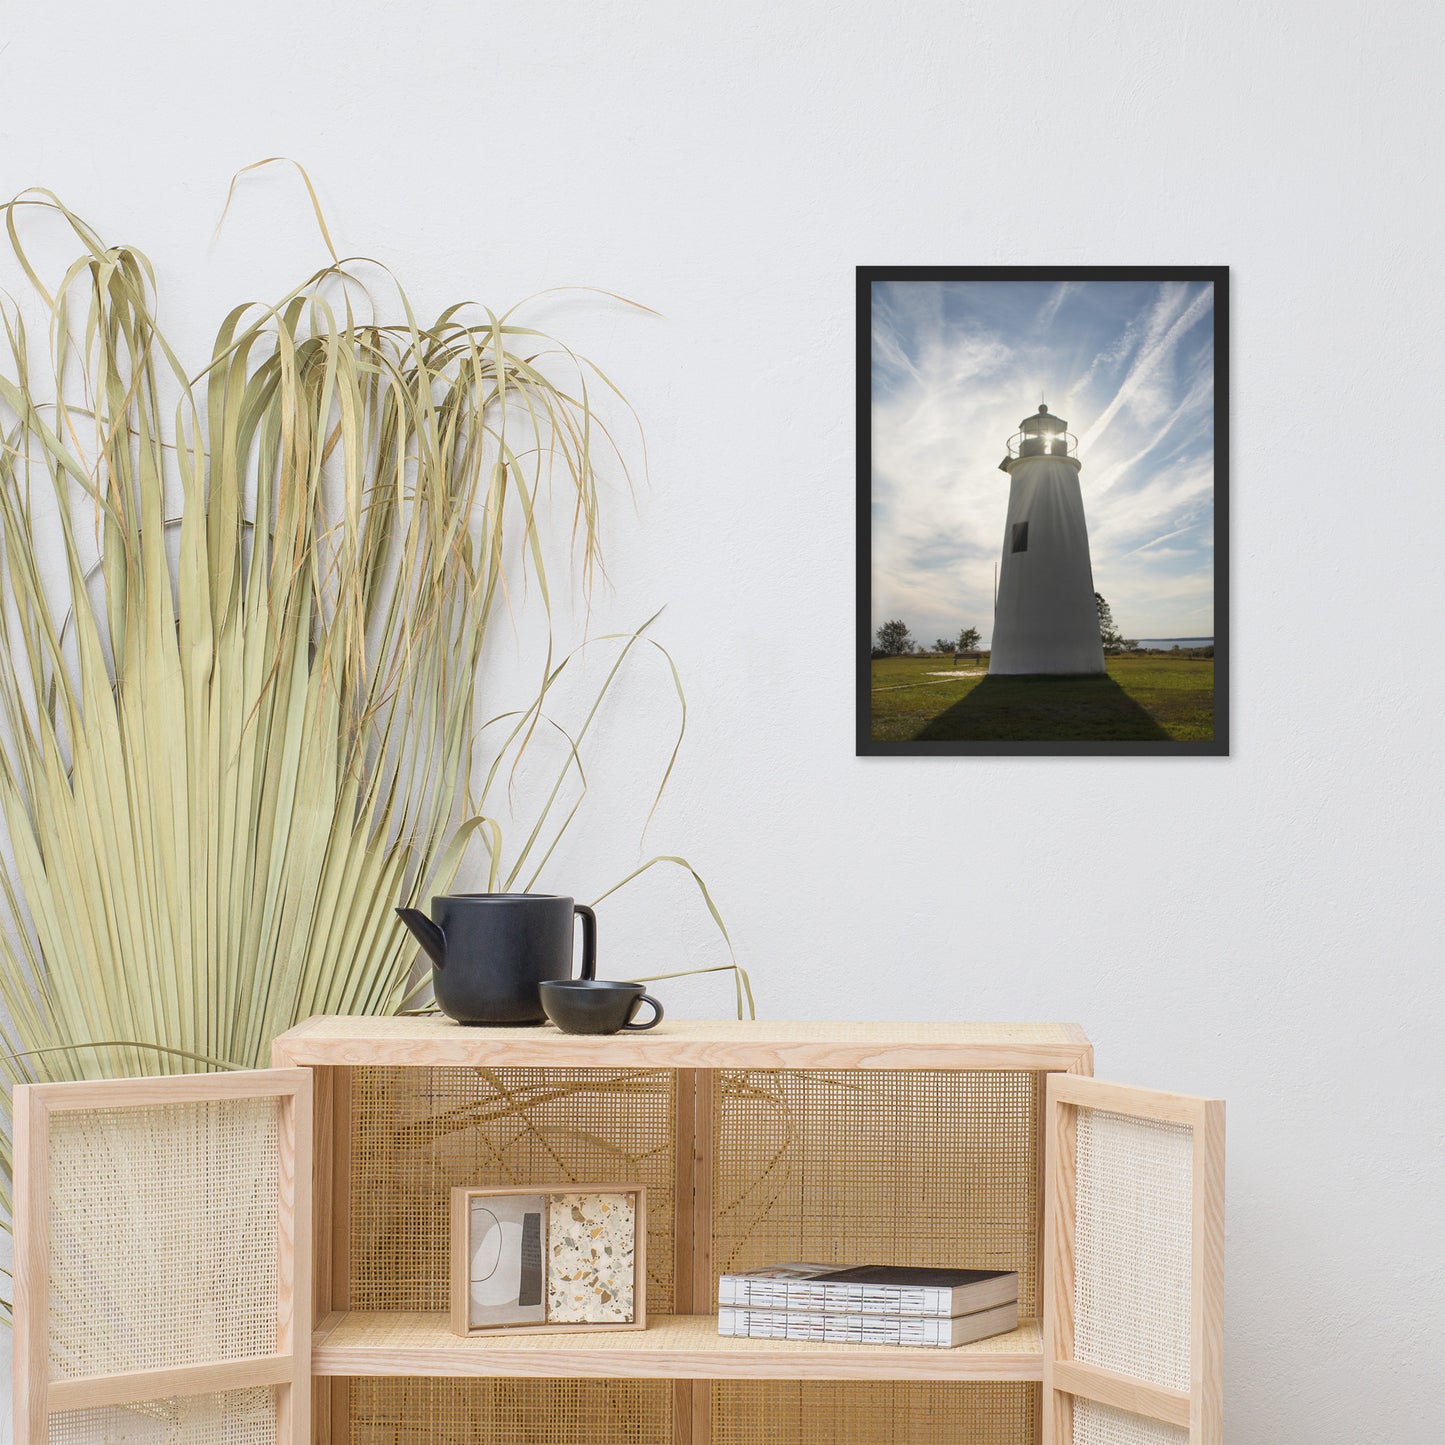 Turkey Point Lighthouse with Sun Flare Framed Photo Paper Wall Art Prints